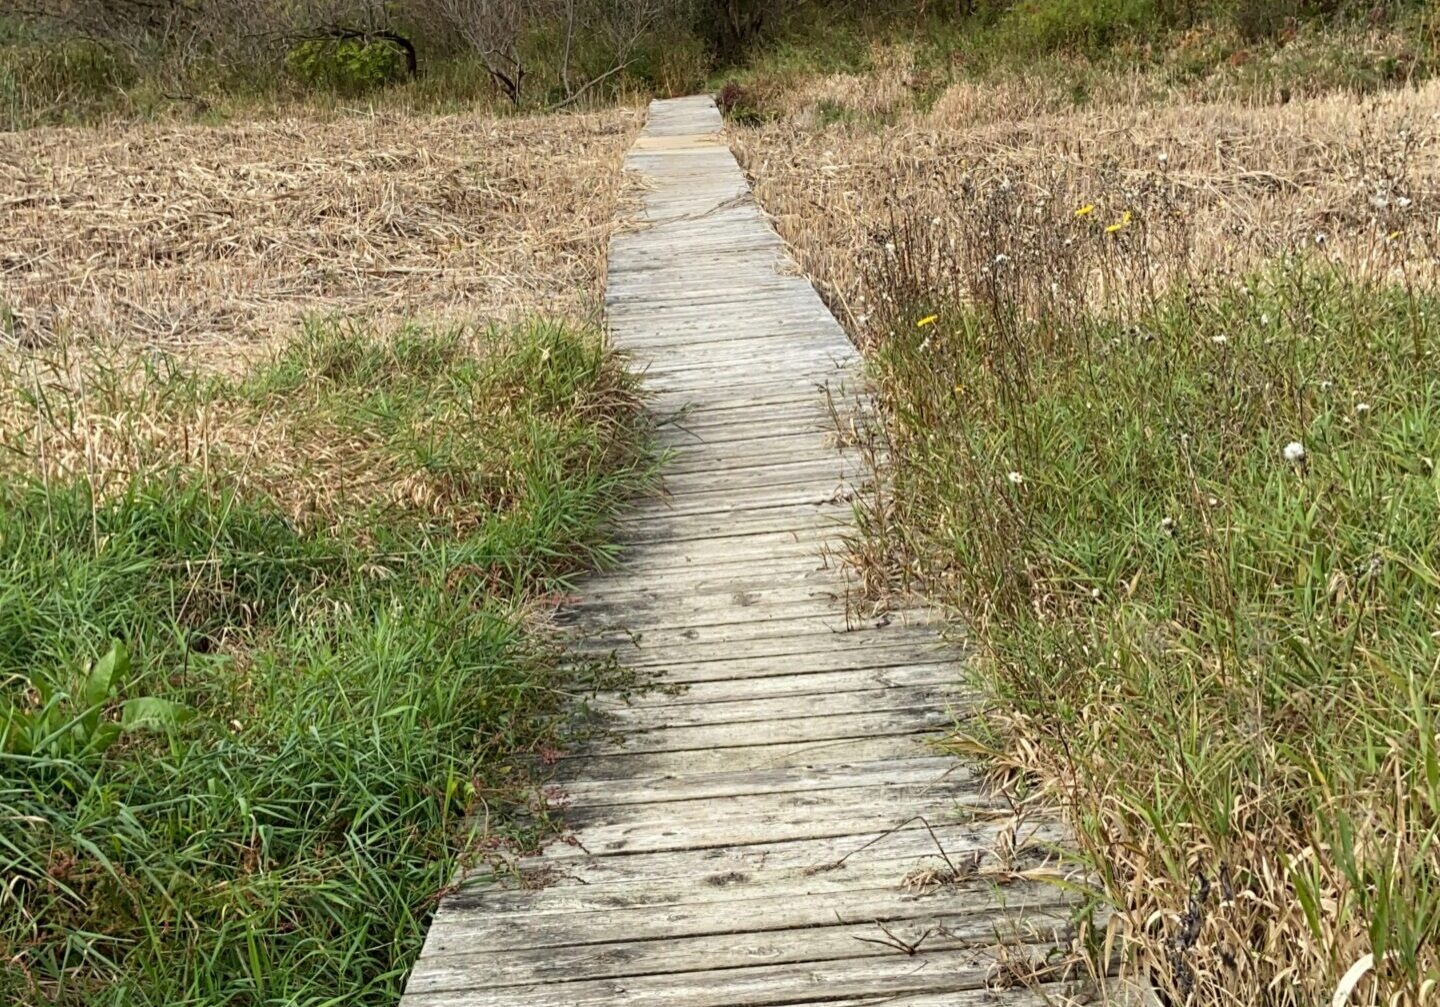 a wooden boardwalk goes straight through a marsh. Overgrown tall grass and reeds grow slightly over the sides of the boardwalk as it disappears into the forest.